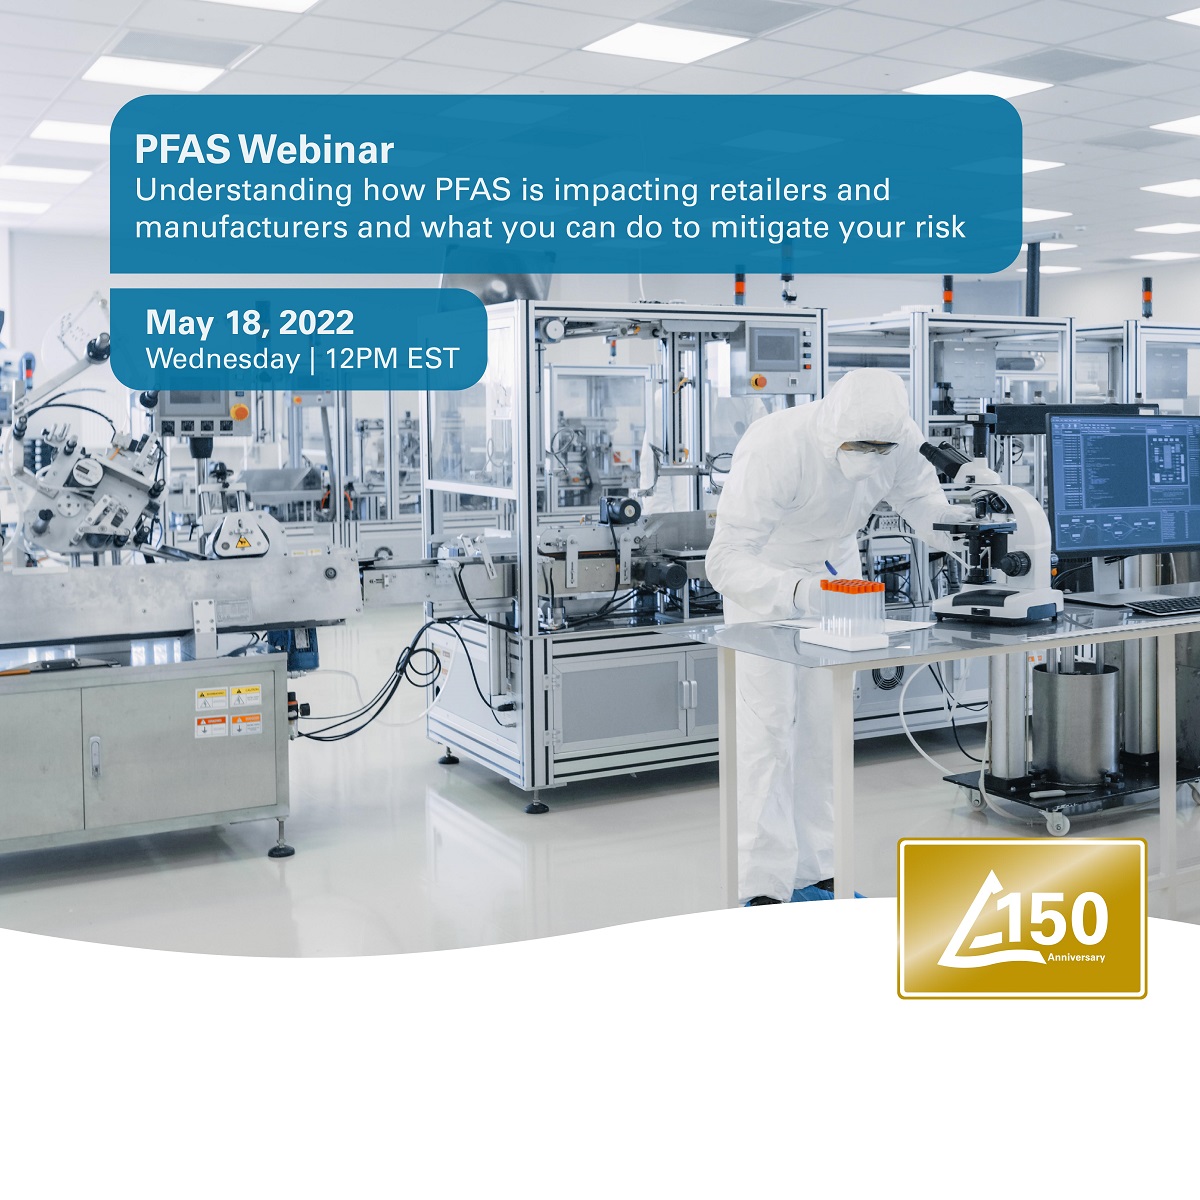 Interested in learning about #PFAS #chemicals? On May 18, our #retail experts will dive into this emerging issue topic, providing insight into understanding what PFAS is, common applications, options for testing, & how to mitigate your risk. Register: tuv.li/1htj